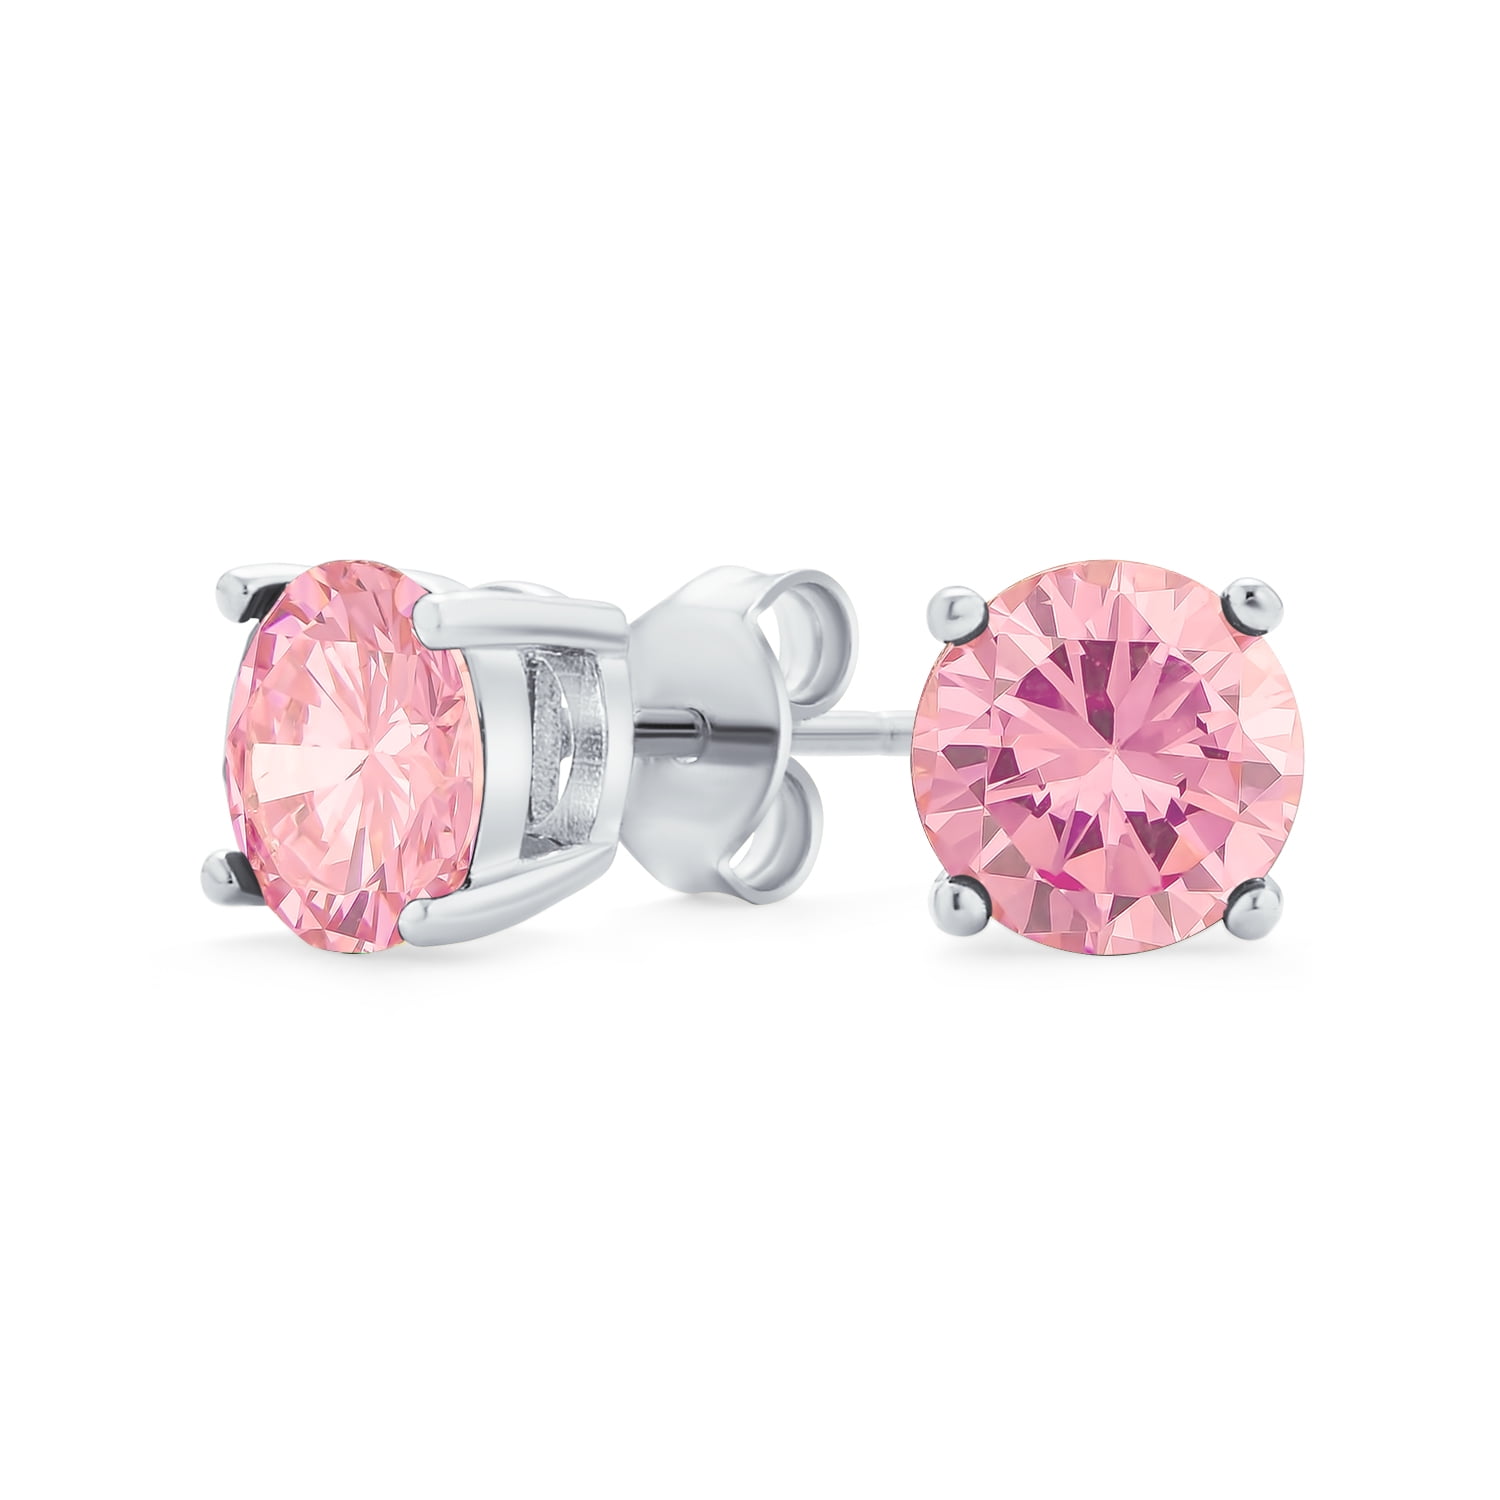 Oval Earrings Pink Simulated CZ Clear Simulated CZ .925 Sterling Silver Pendant Set